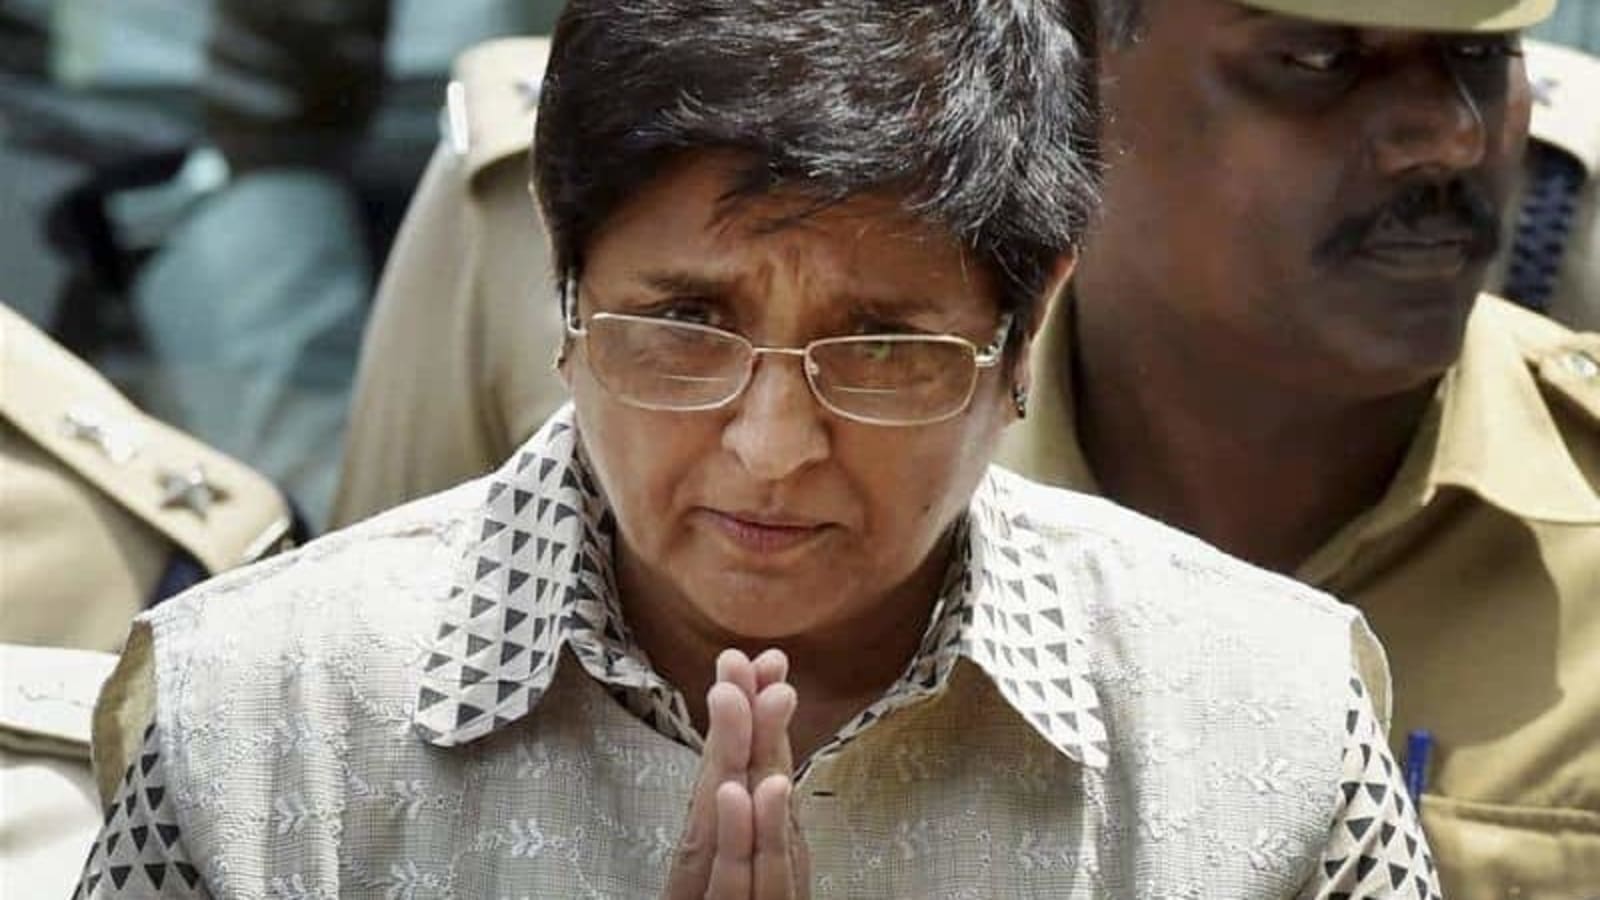 Thank Centre for lifetime experience', says Kiran Bedi after removal as  Puducherry LG | Latest News India - Hindustan Times